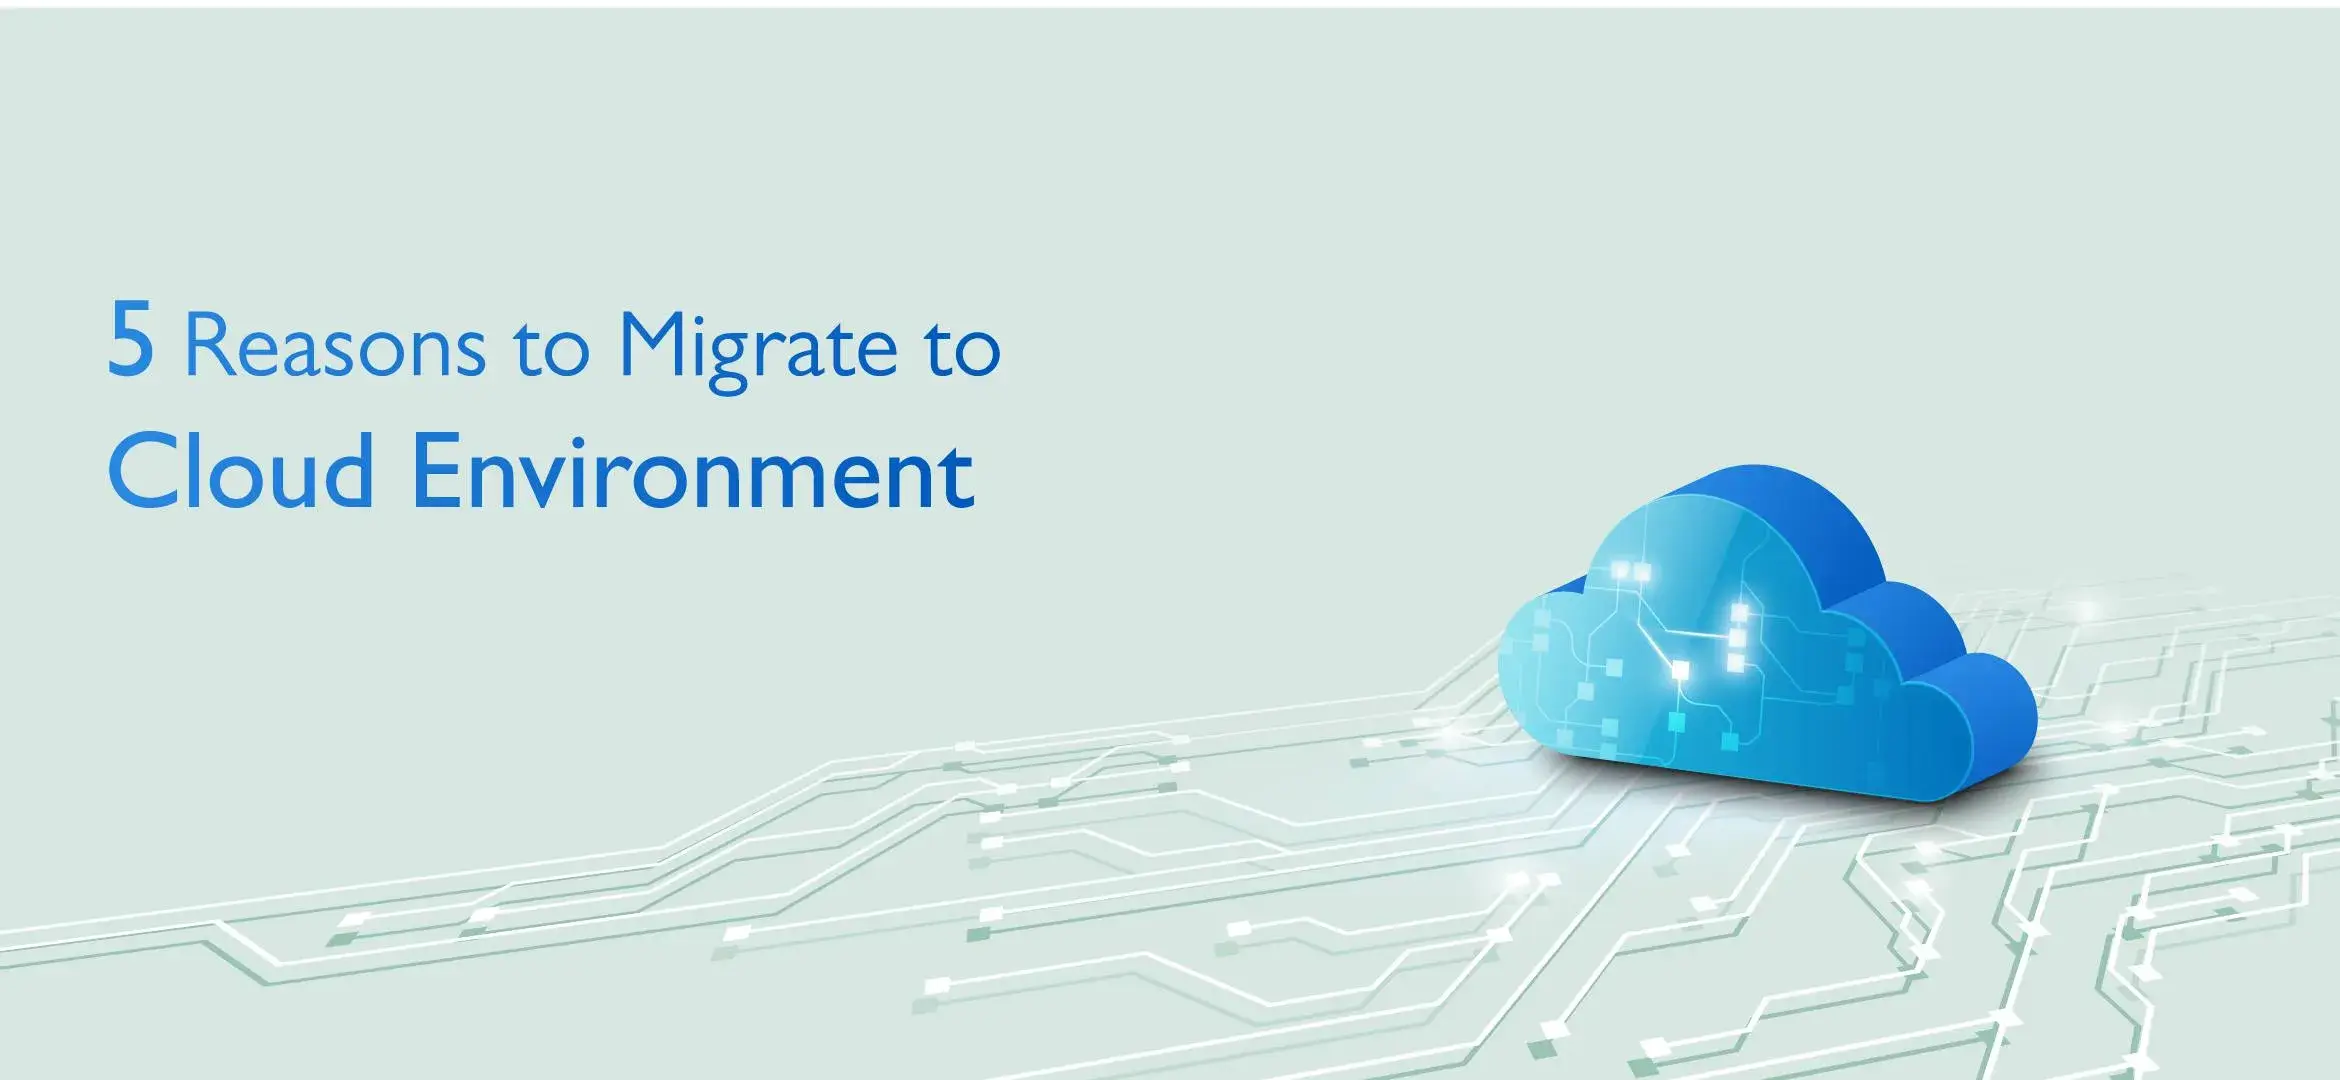 17122323125 Reasons to Migrate to Cloud Environment.webp